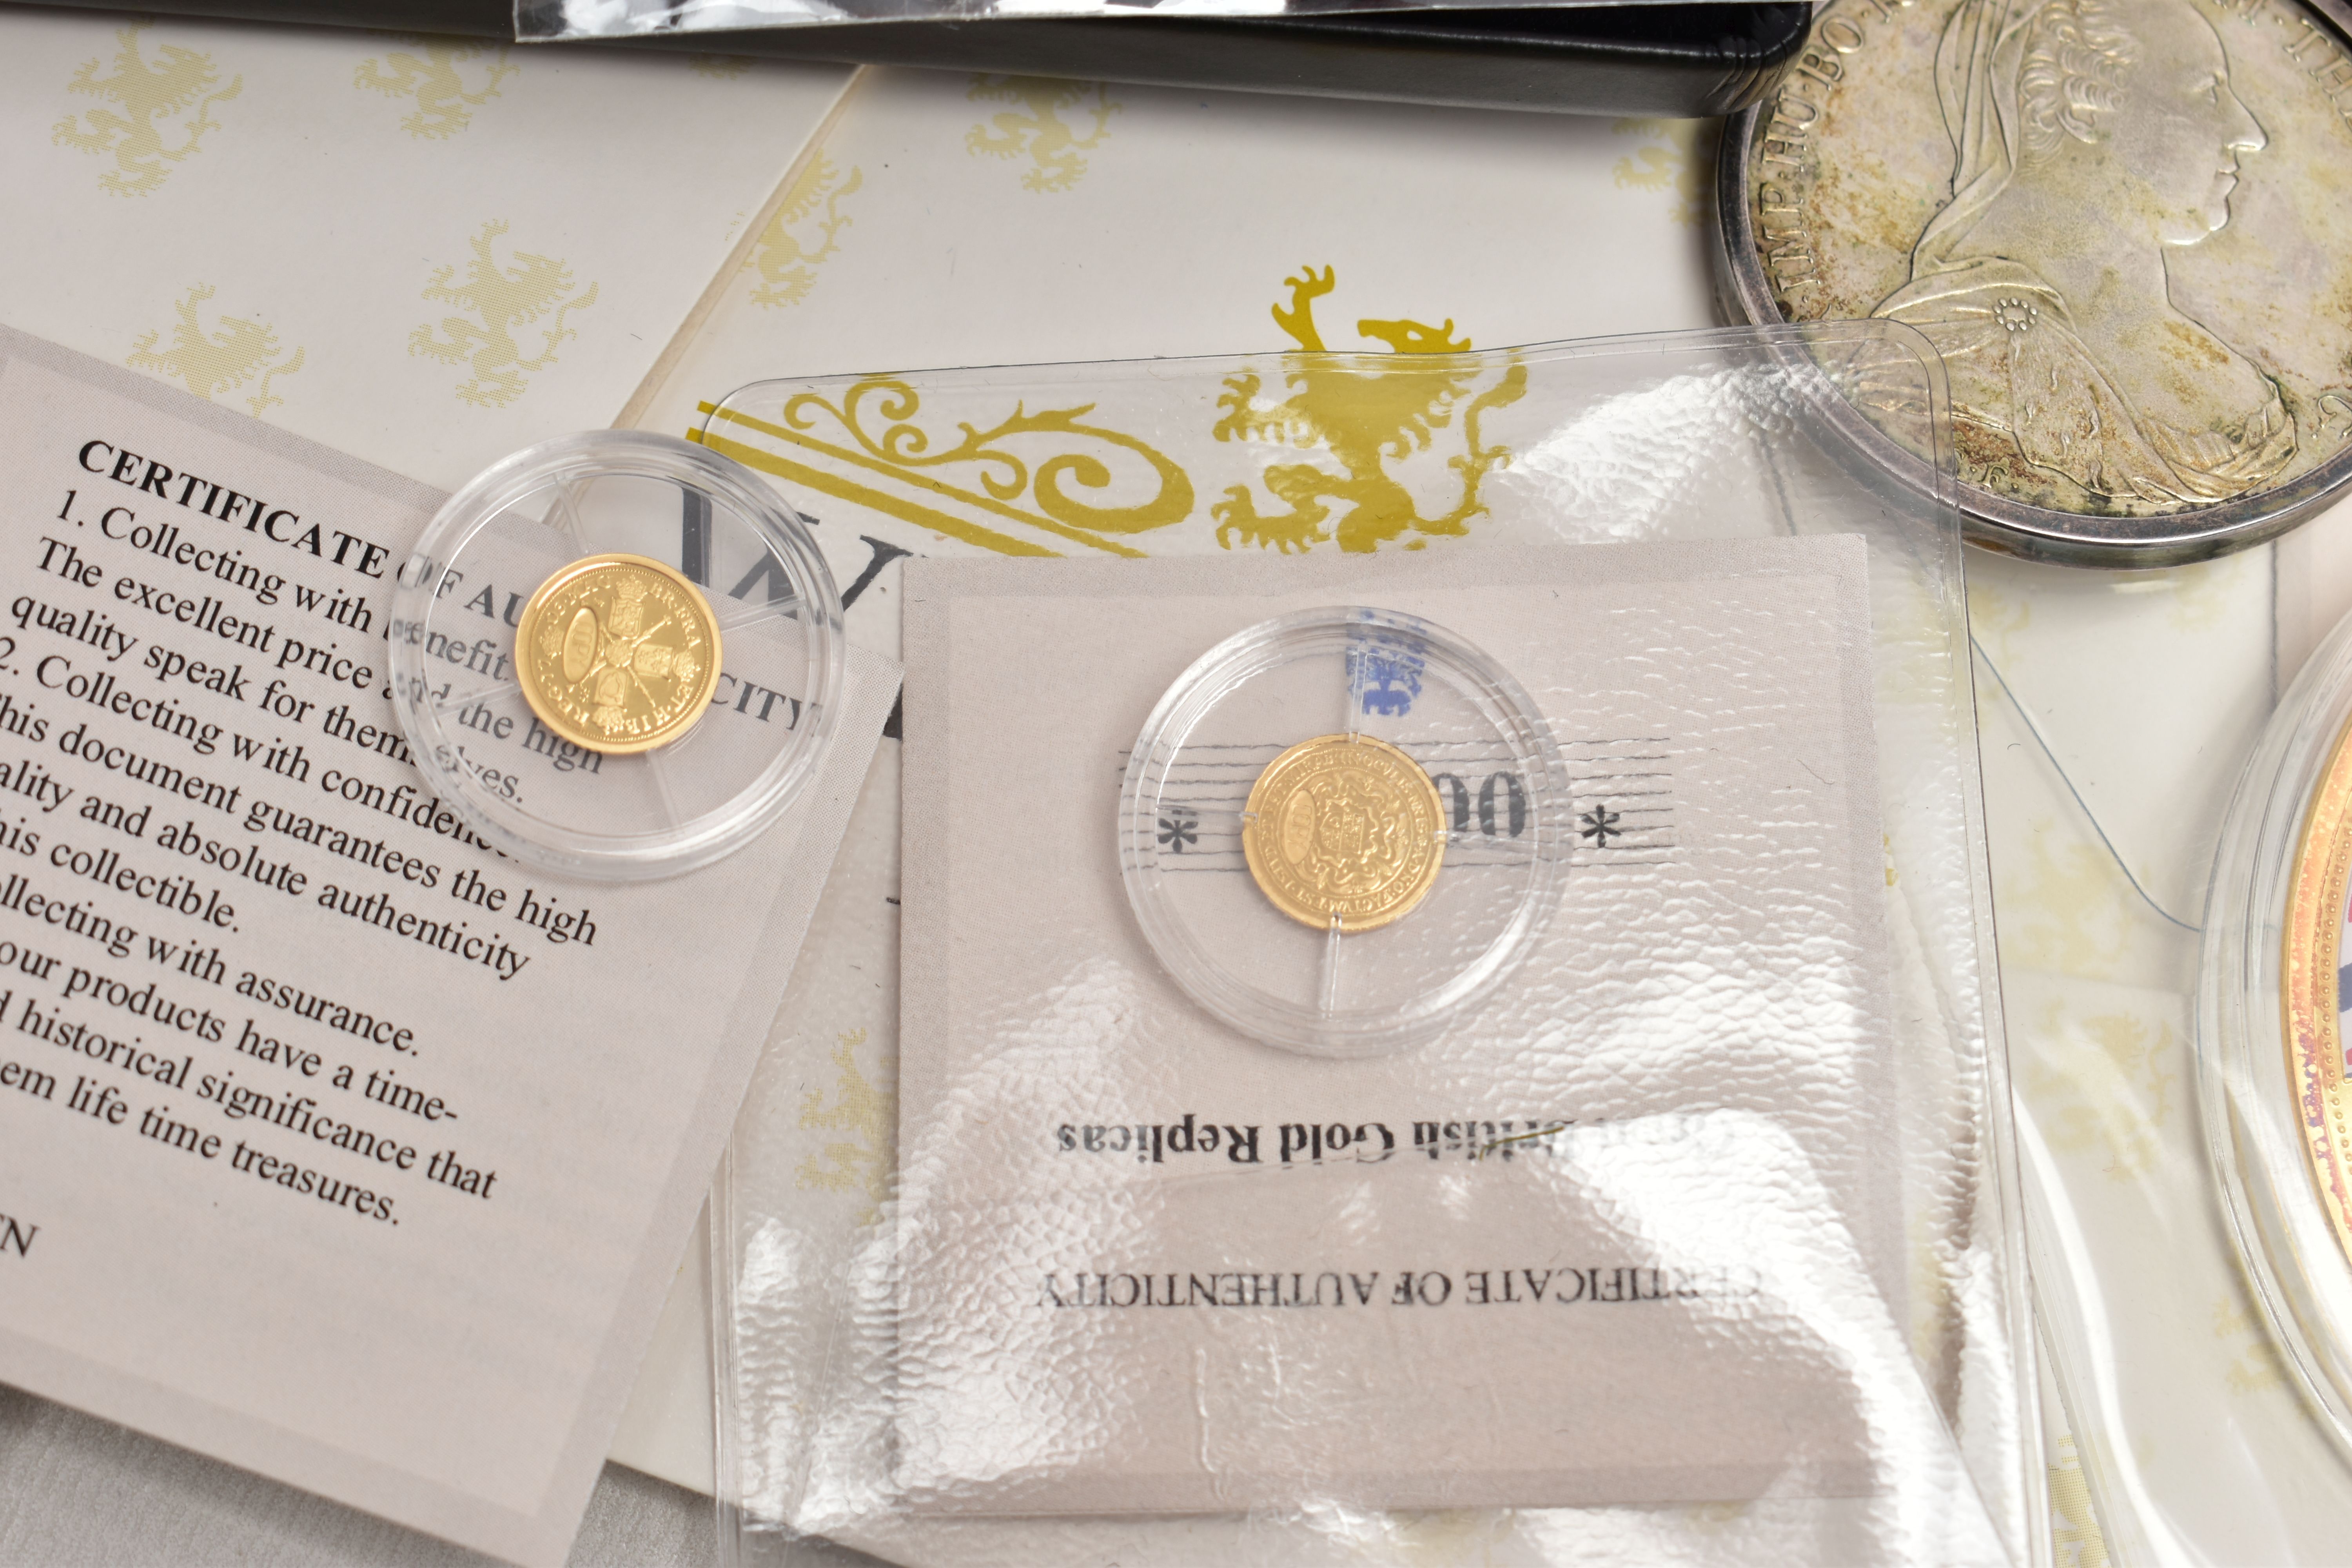 A GREAT BRITISH GOLD REPLICA SET OF EIGHT SOLID .585 GOLD 0.5 GRAM COINS, all with certificates, - Image 3 of 5